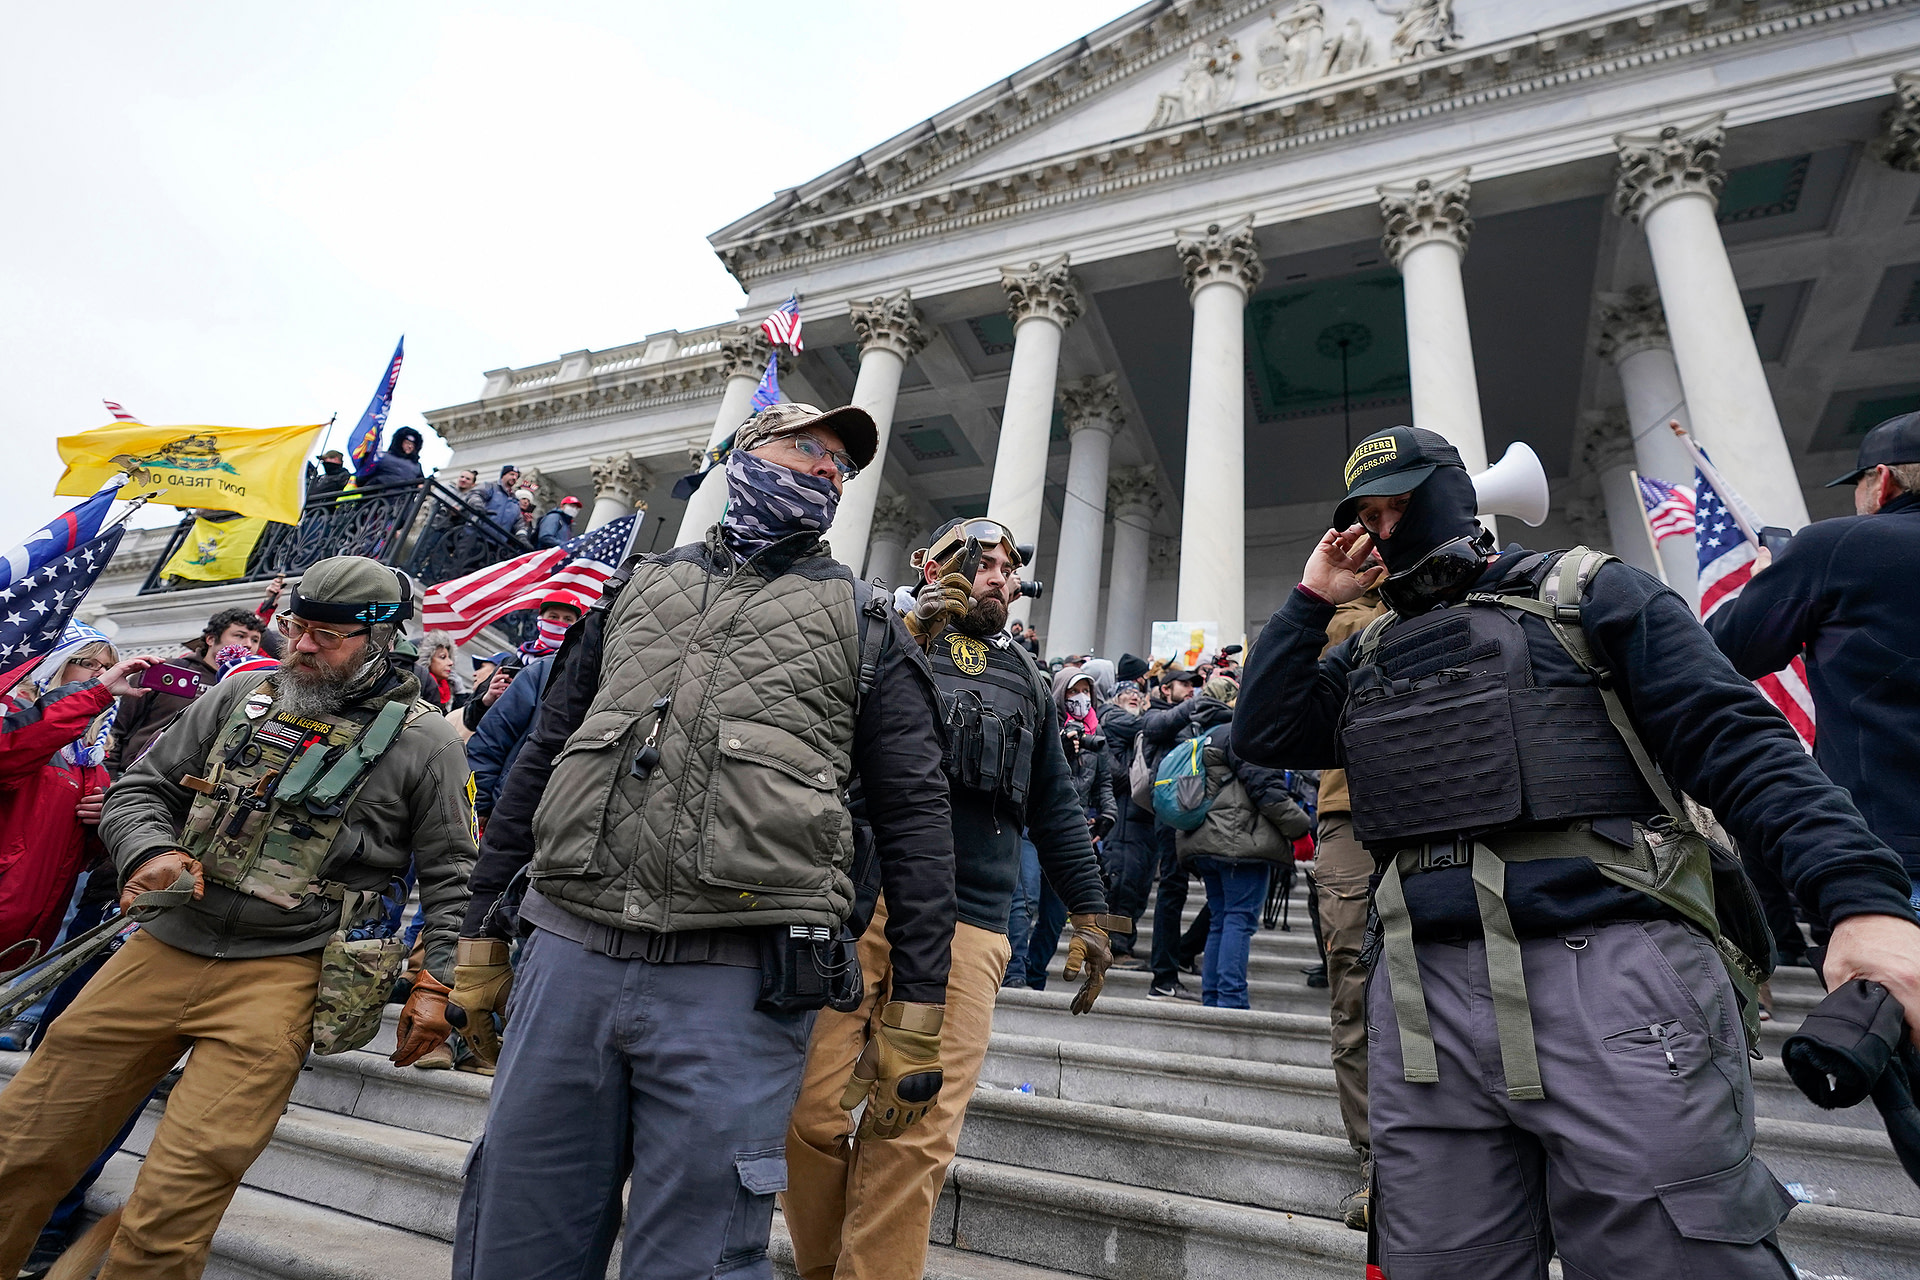 Oath Keepers members convicted of seditious conspiracy